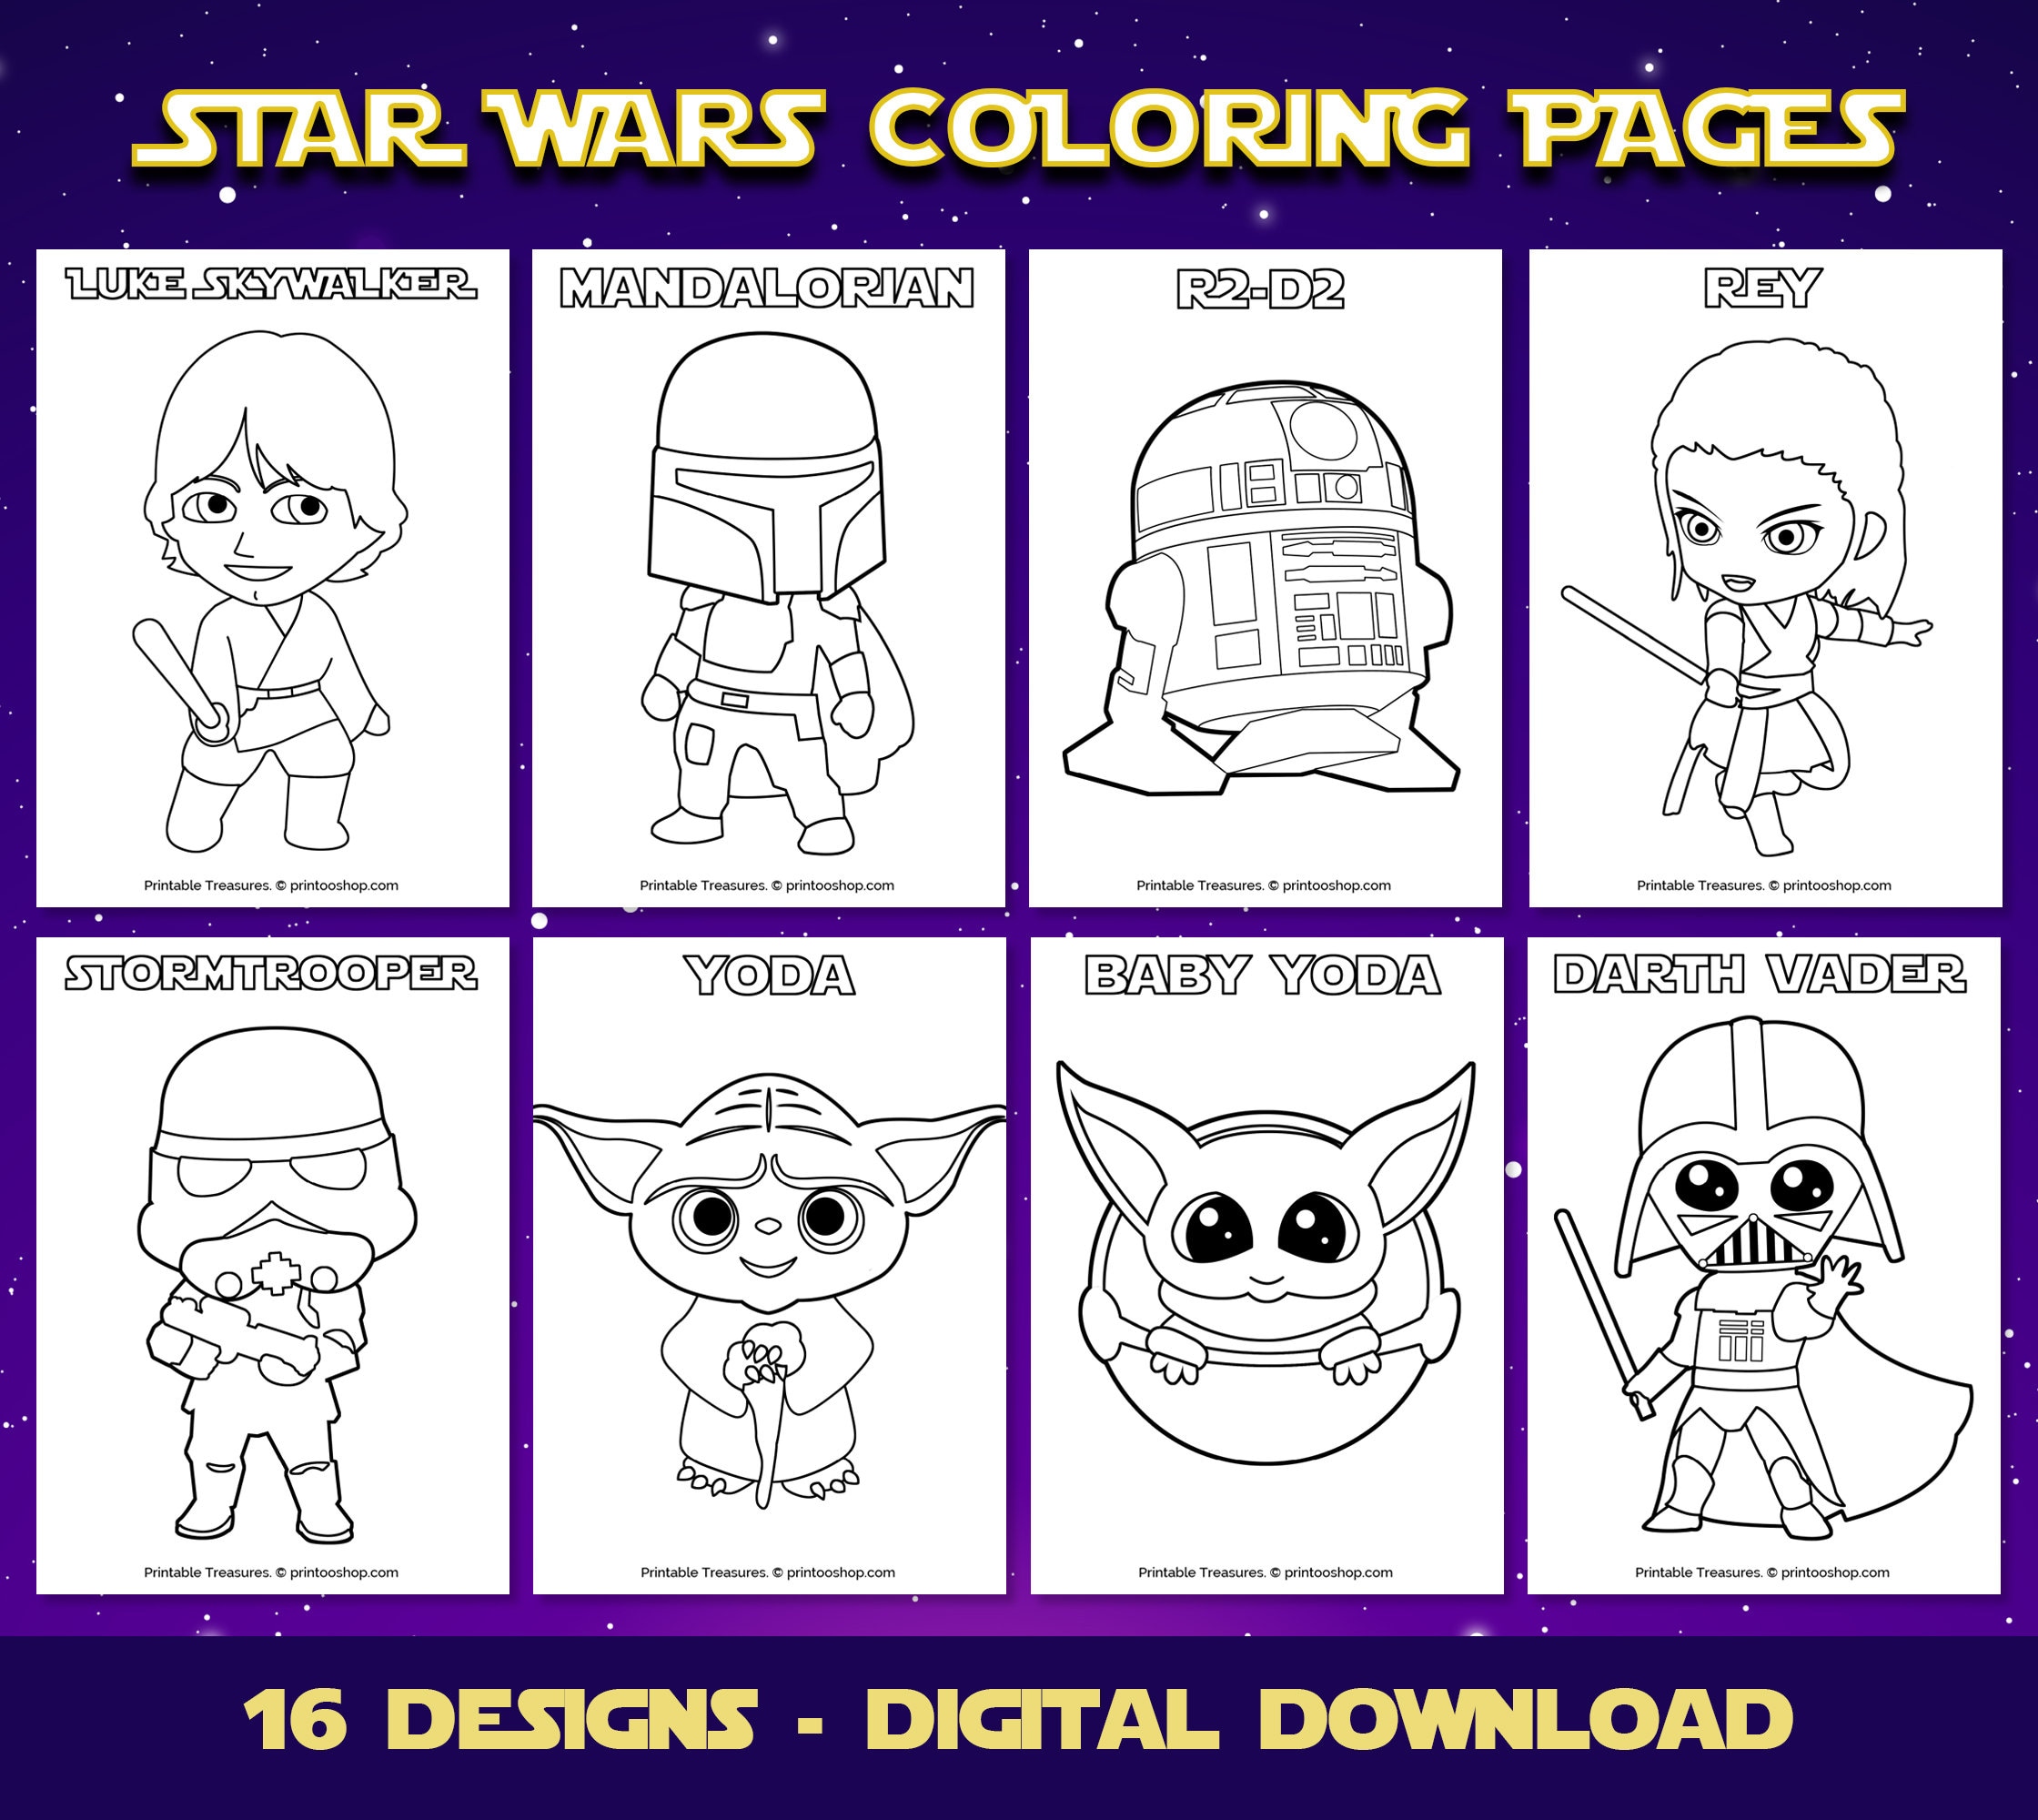 Star wars coloring pages coloring pages printable birthday star wars party favors activity book printable coloring pages for kids